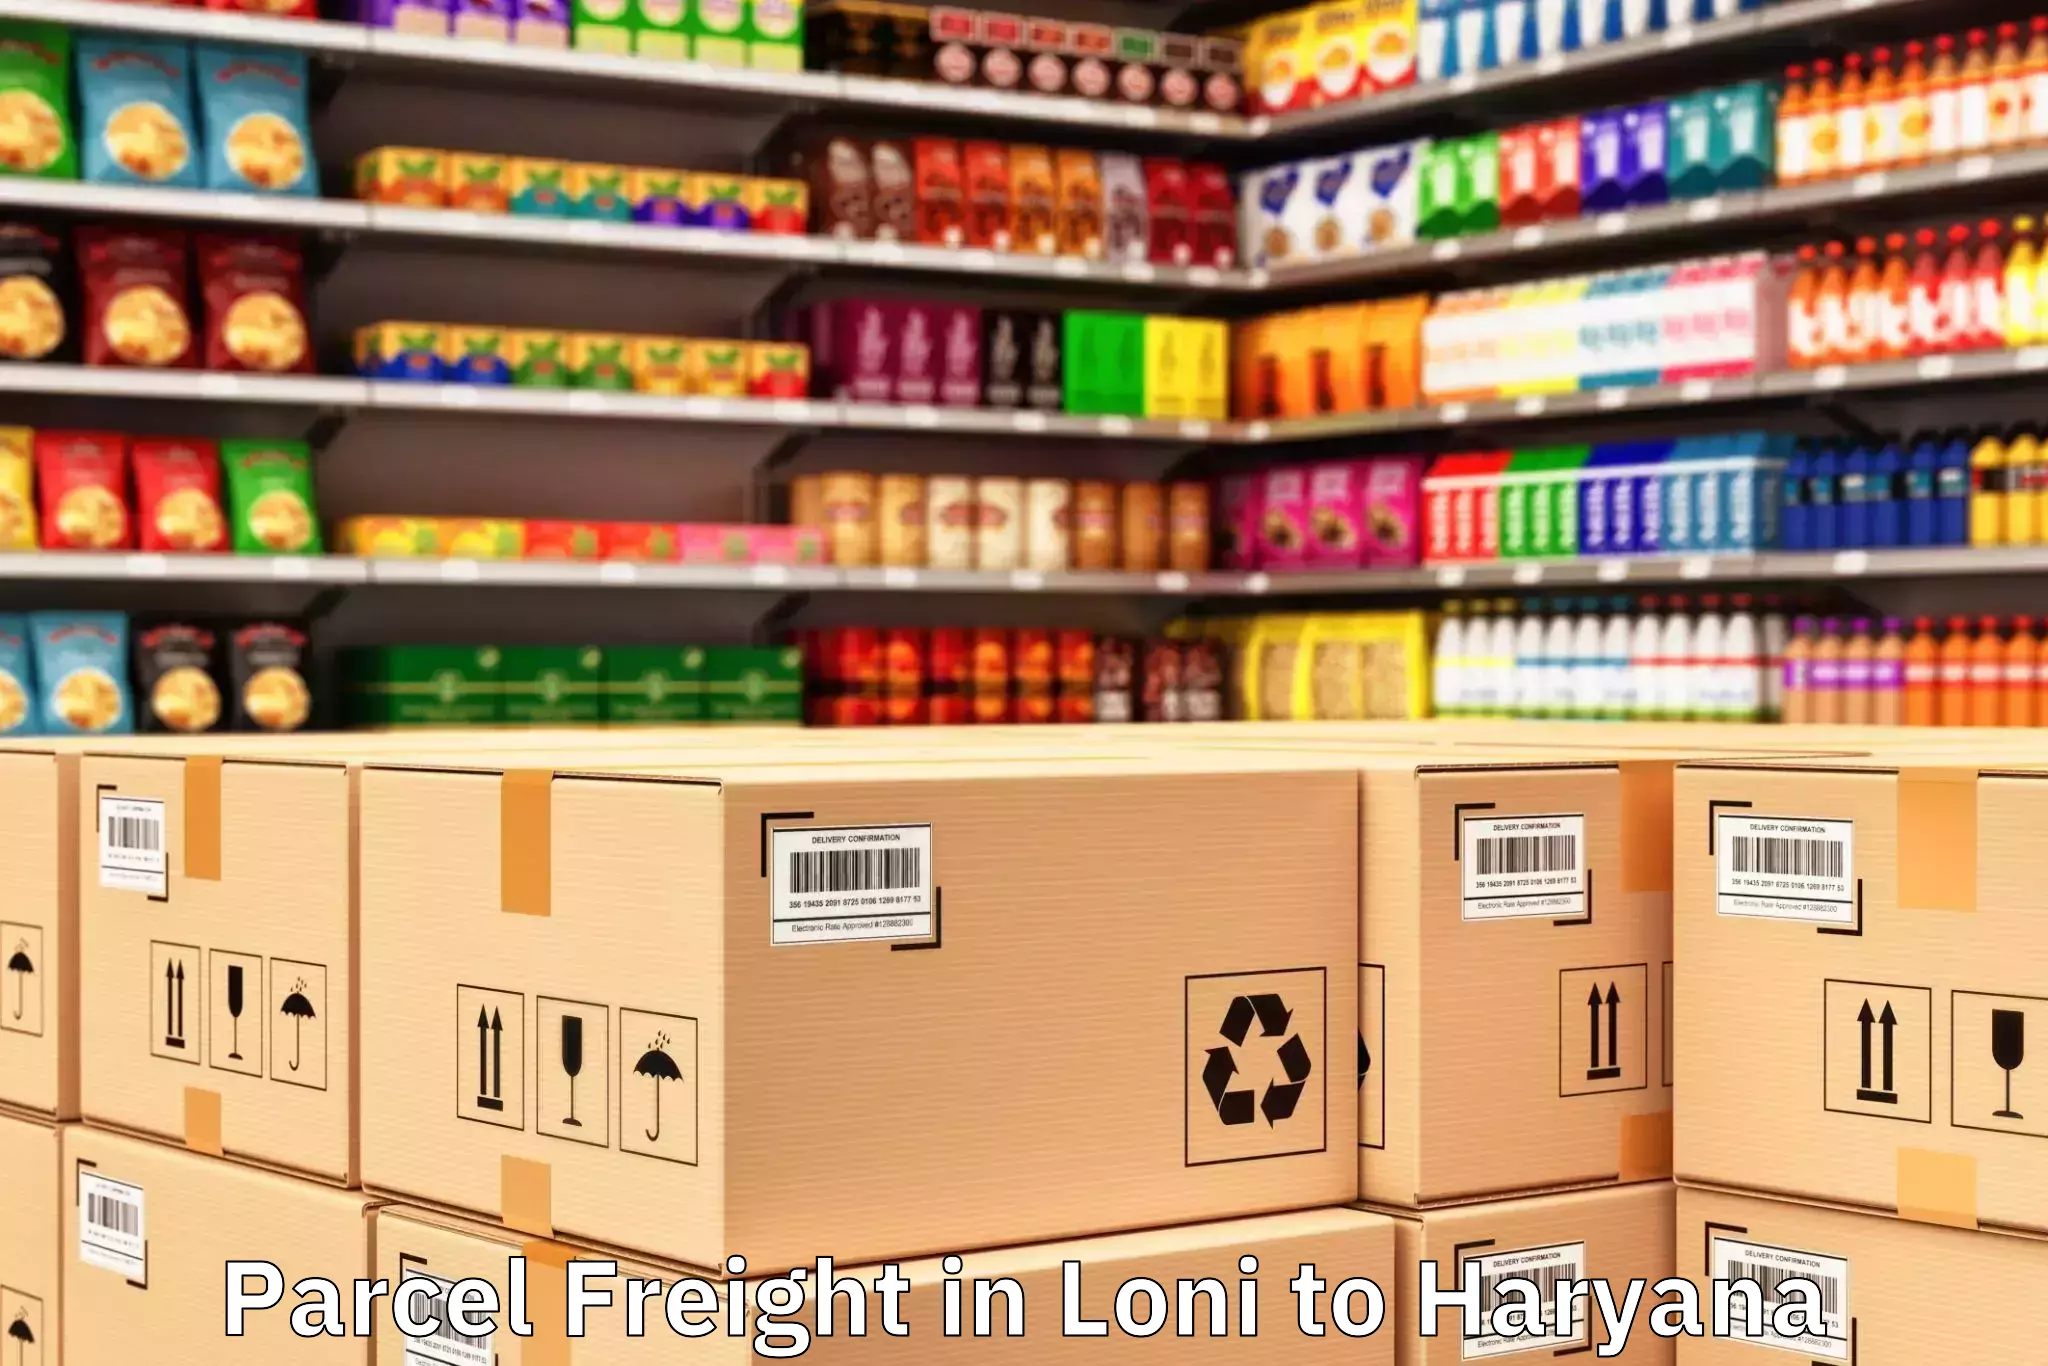 Reliable Loni to The Northcap University Gurgaon Parcel Freight